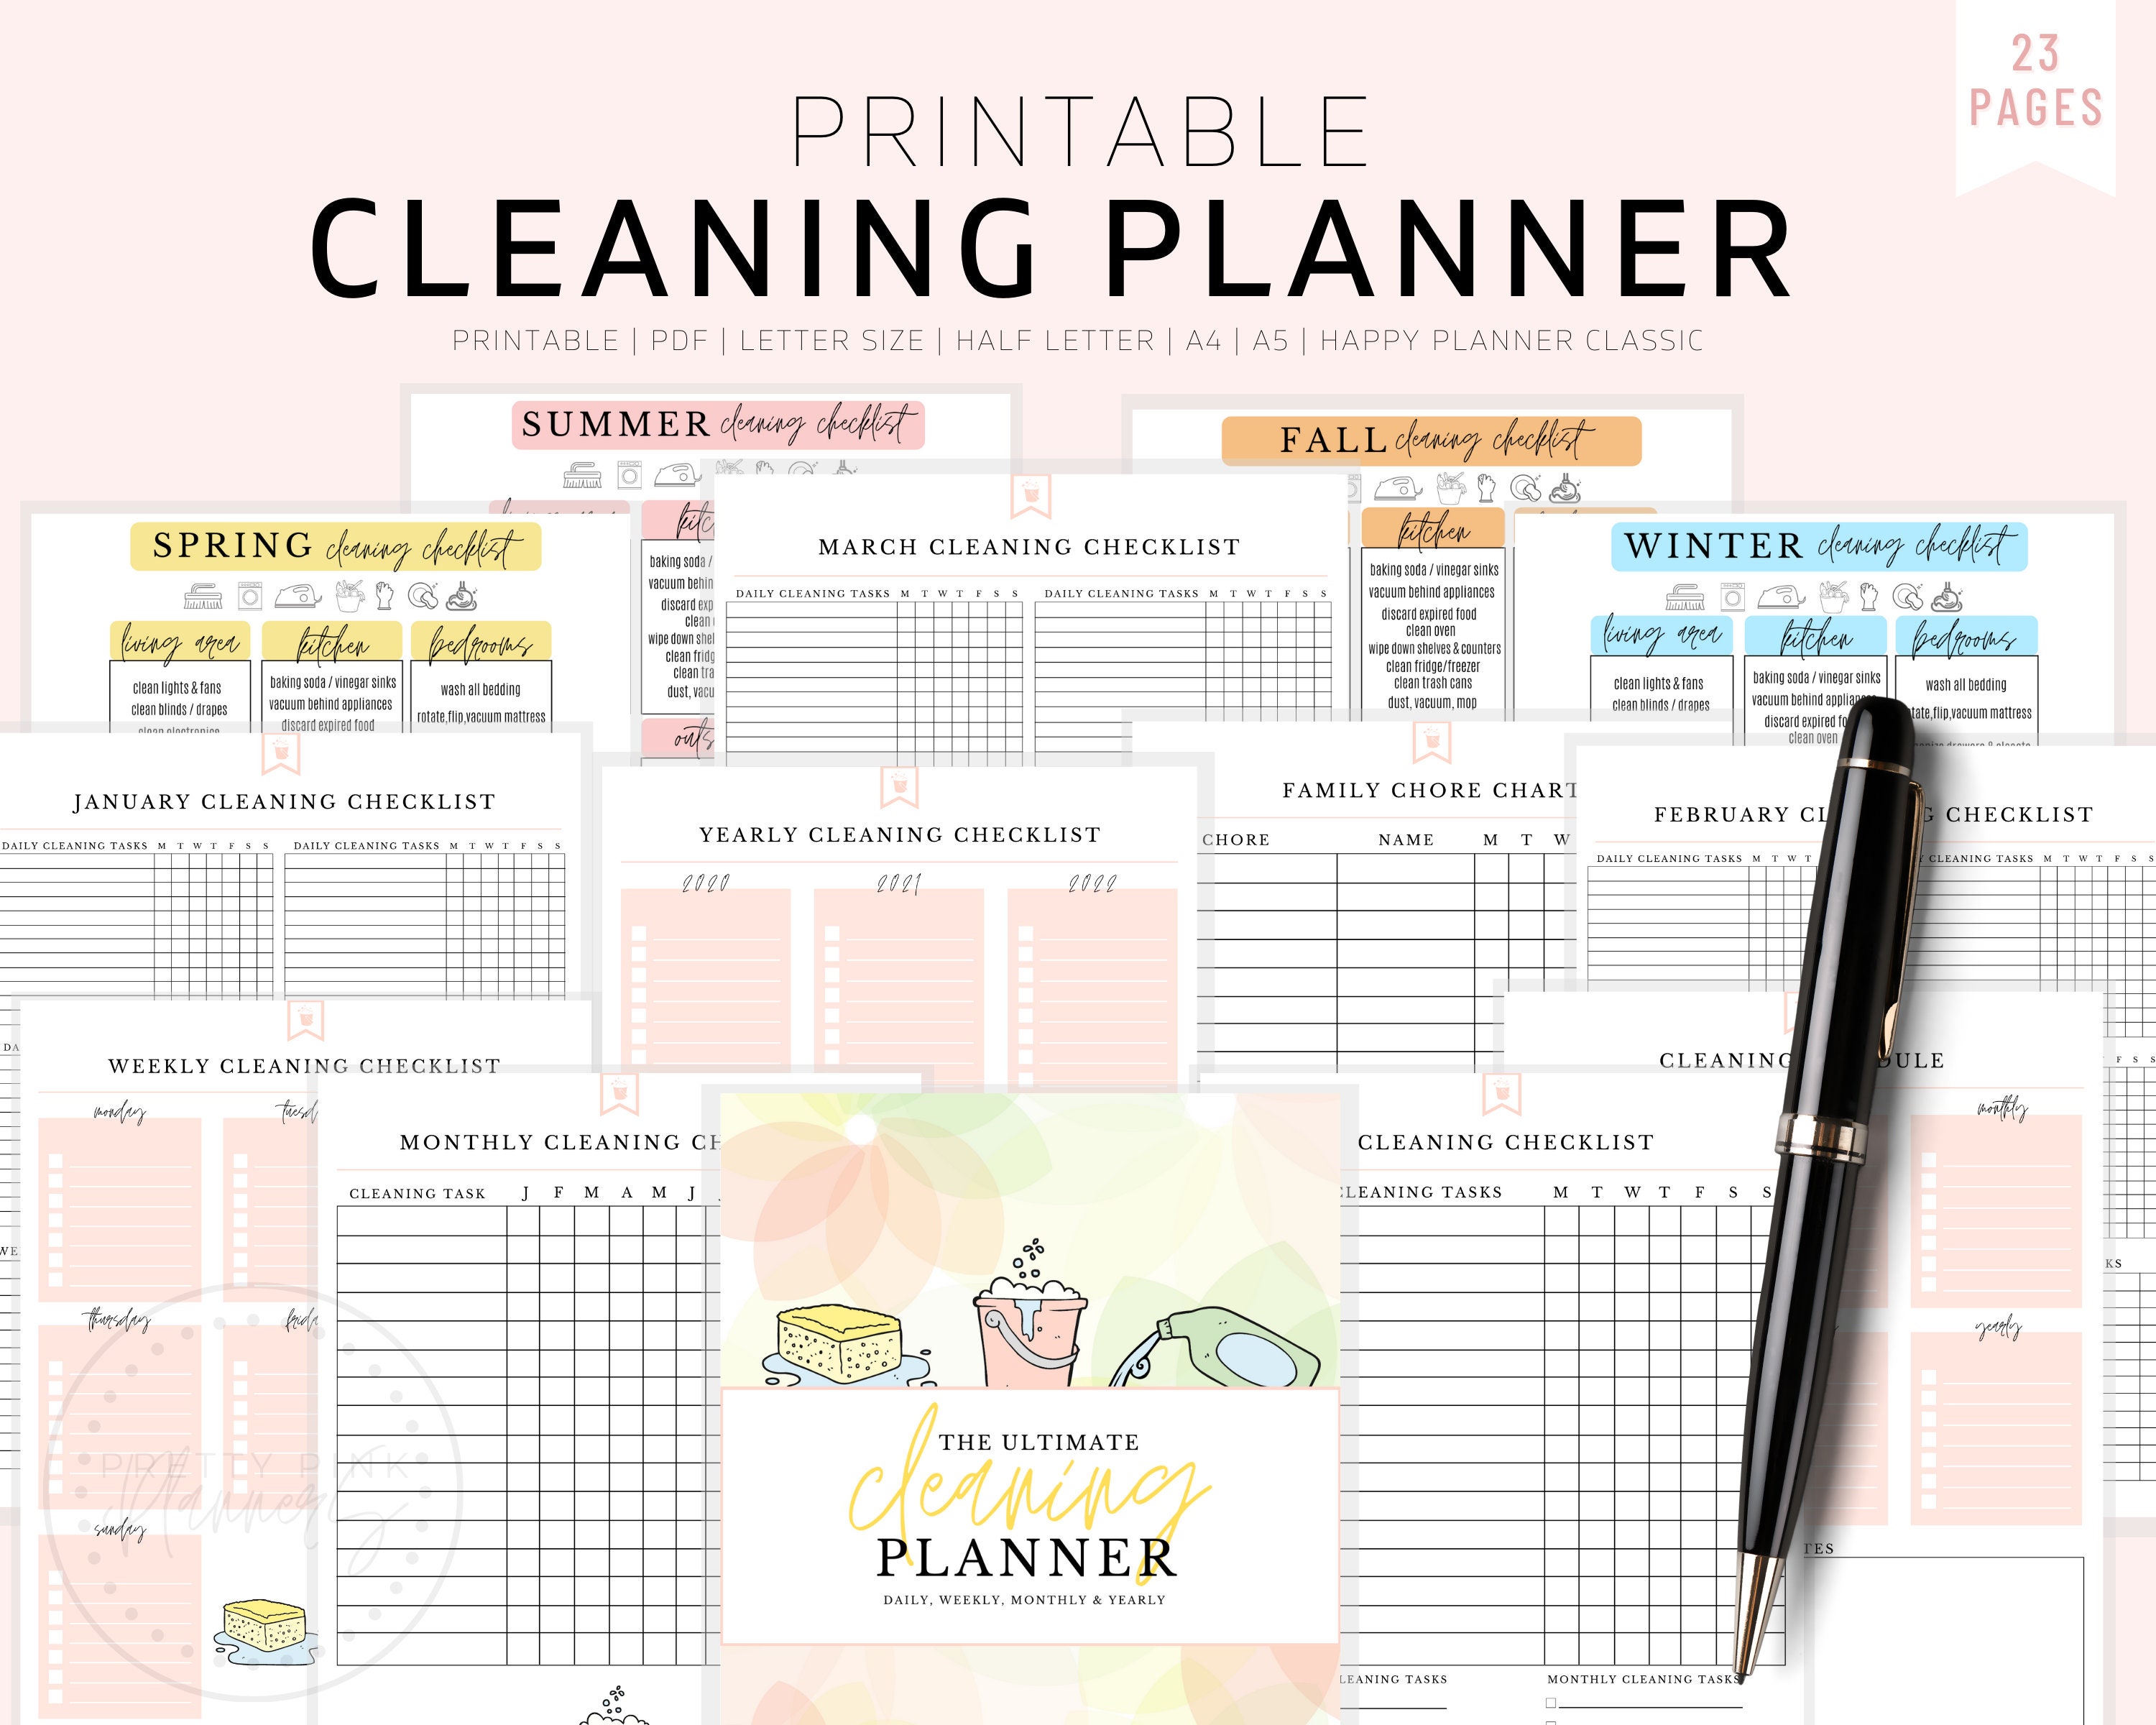 Cleaning plan. Cleaning Planner. Weekly Cleaning Planner. Clean Plan.